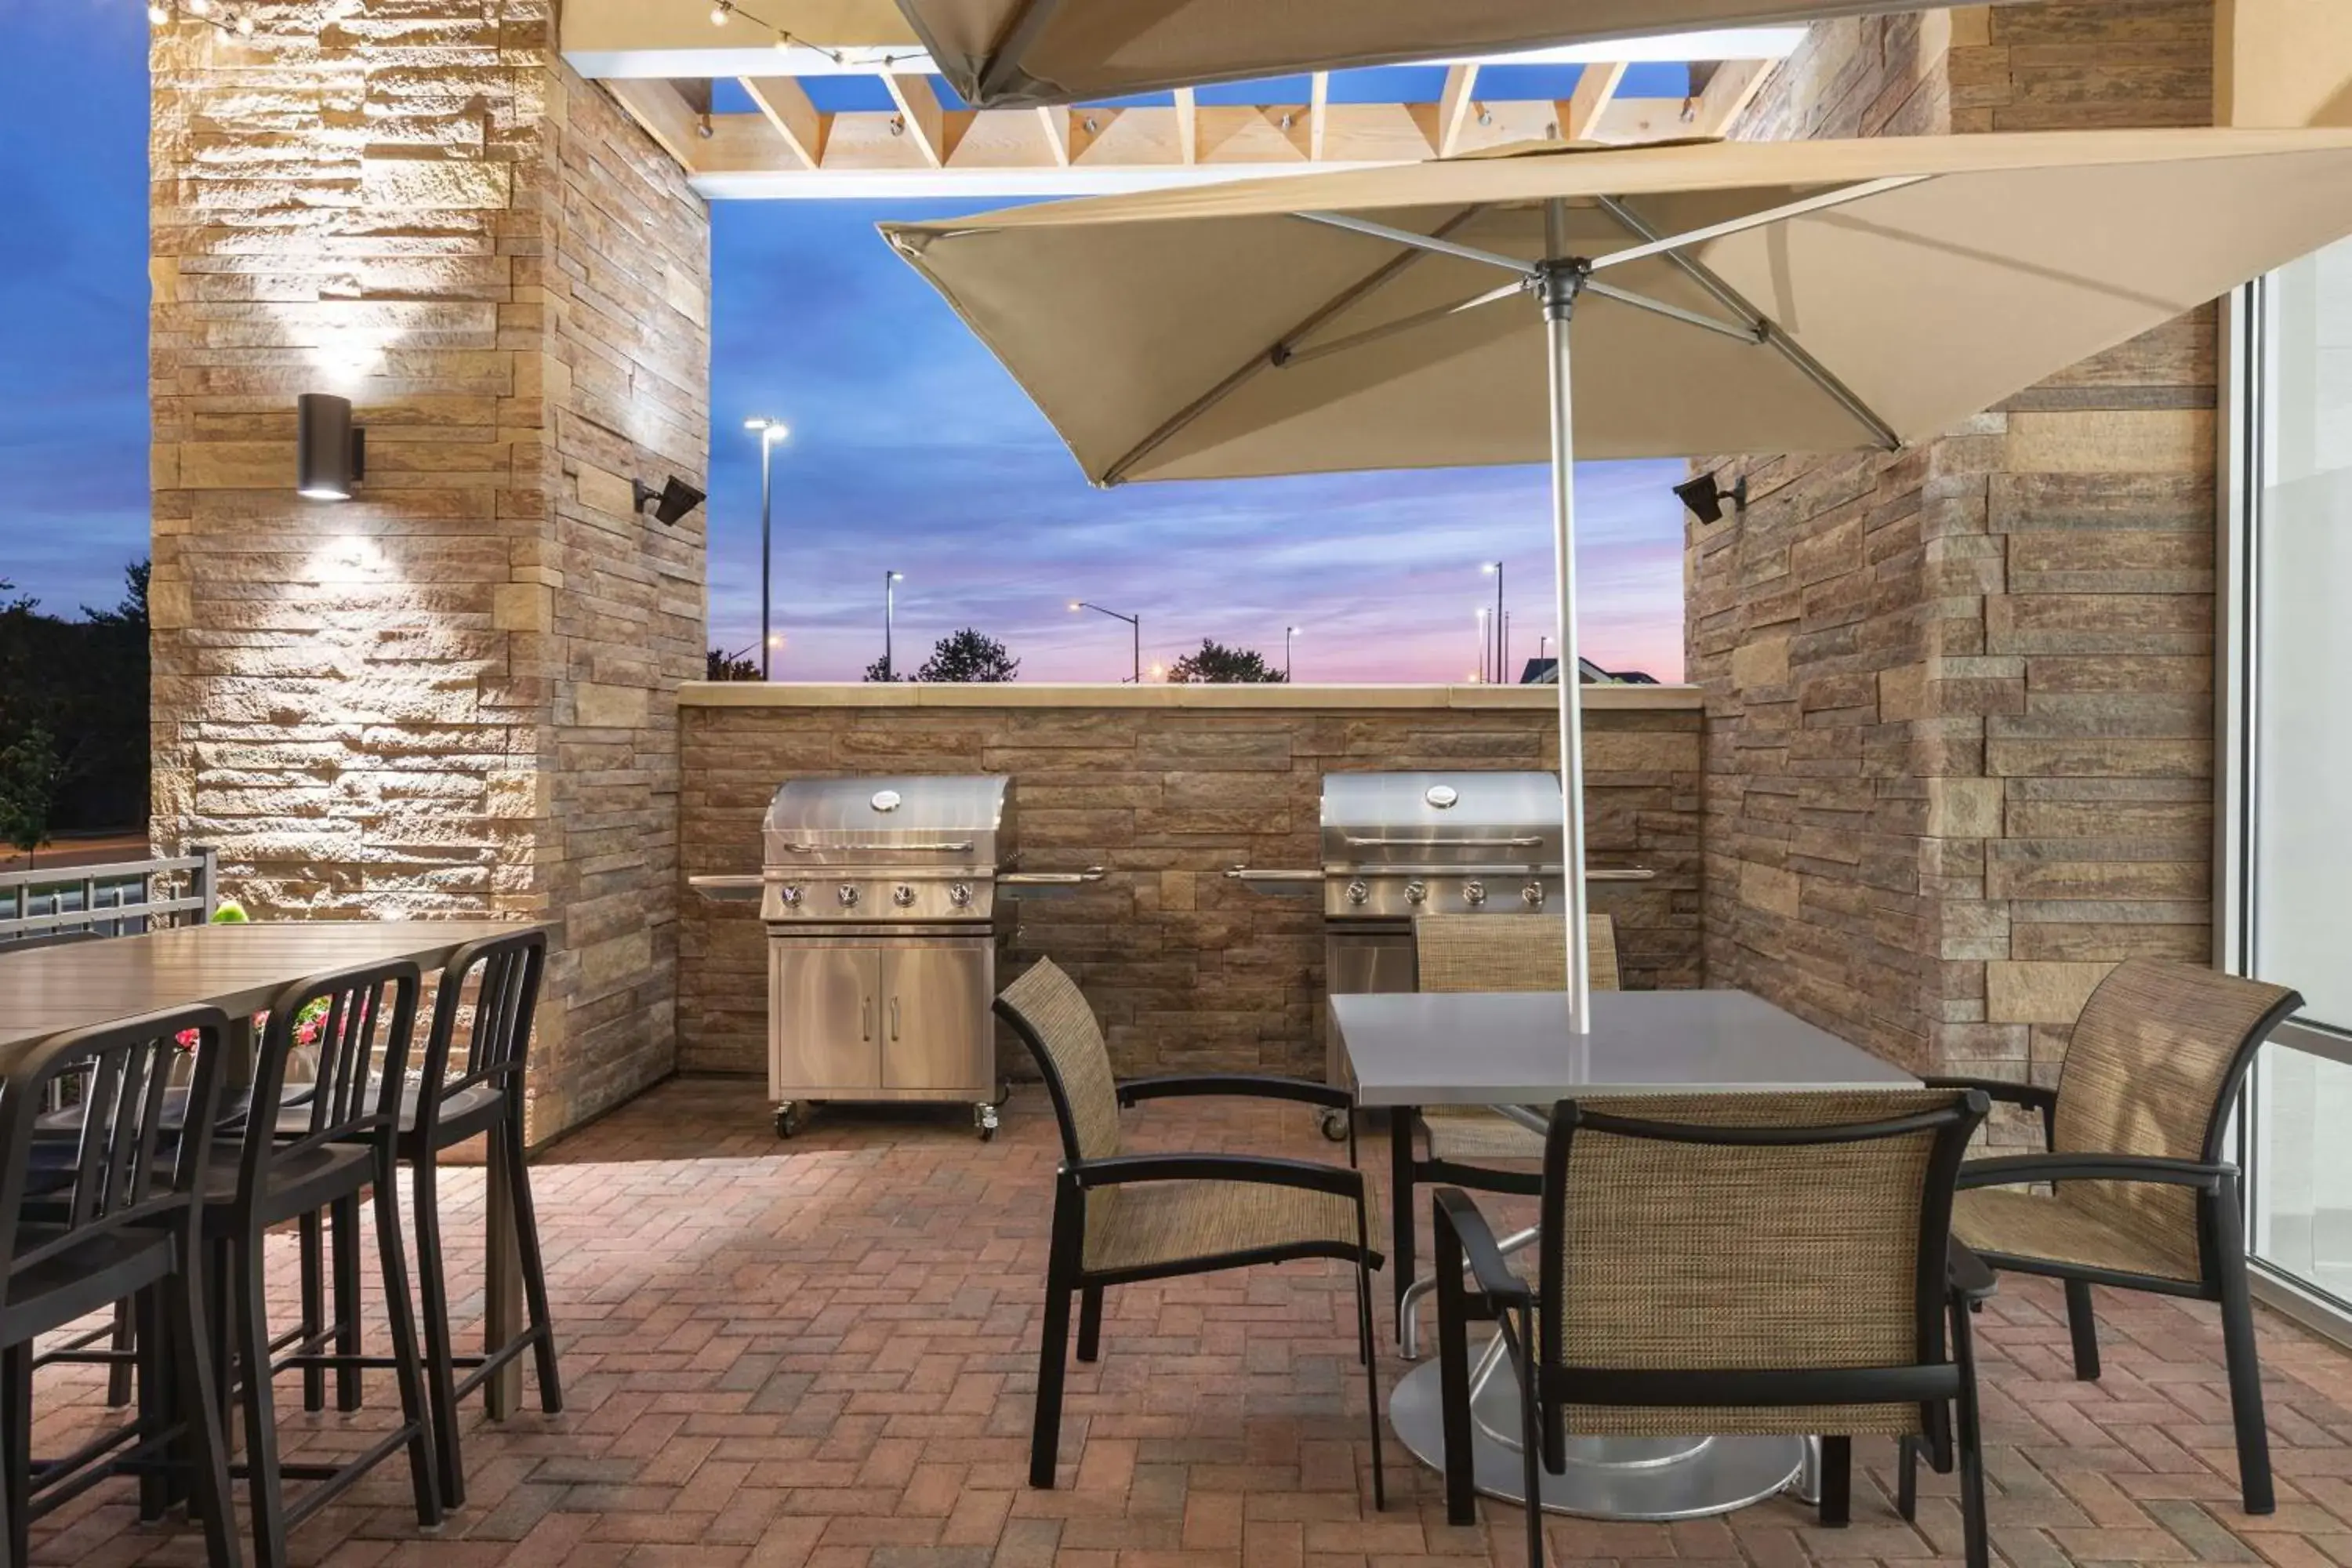 Patio, Dining Area in Home2 Suites By Hilton Leesburg, Va